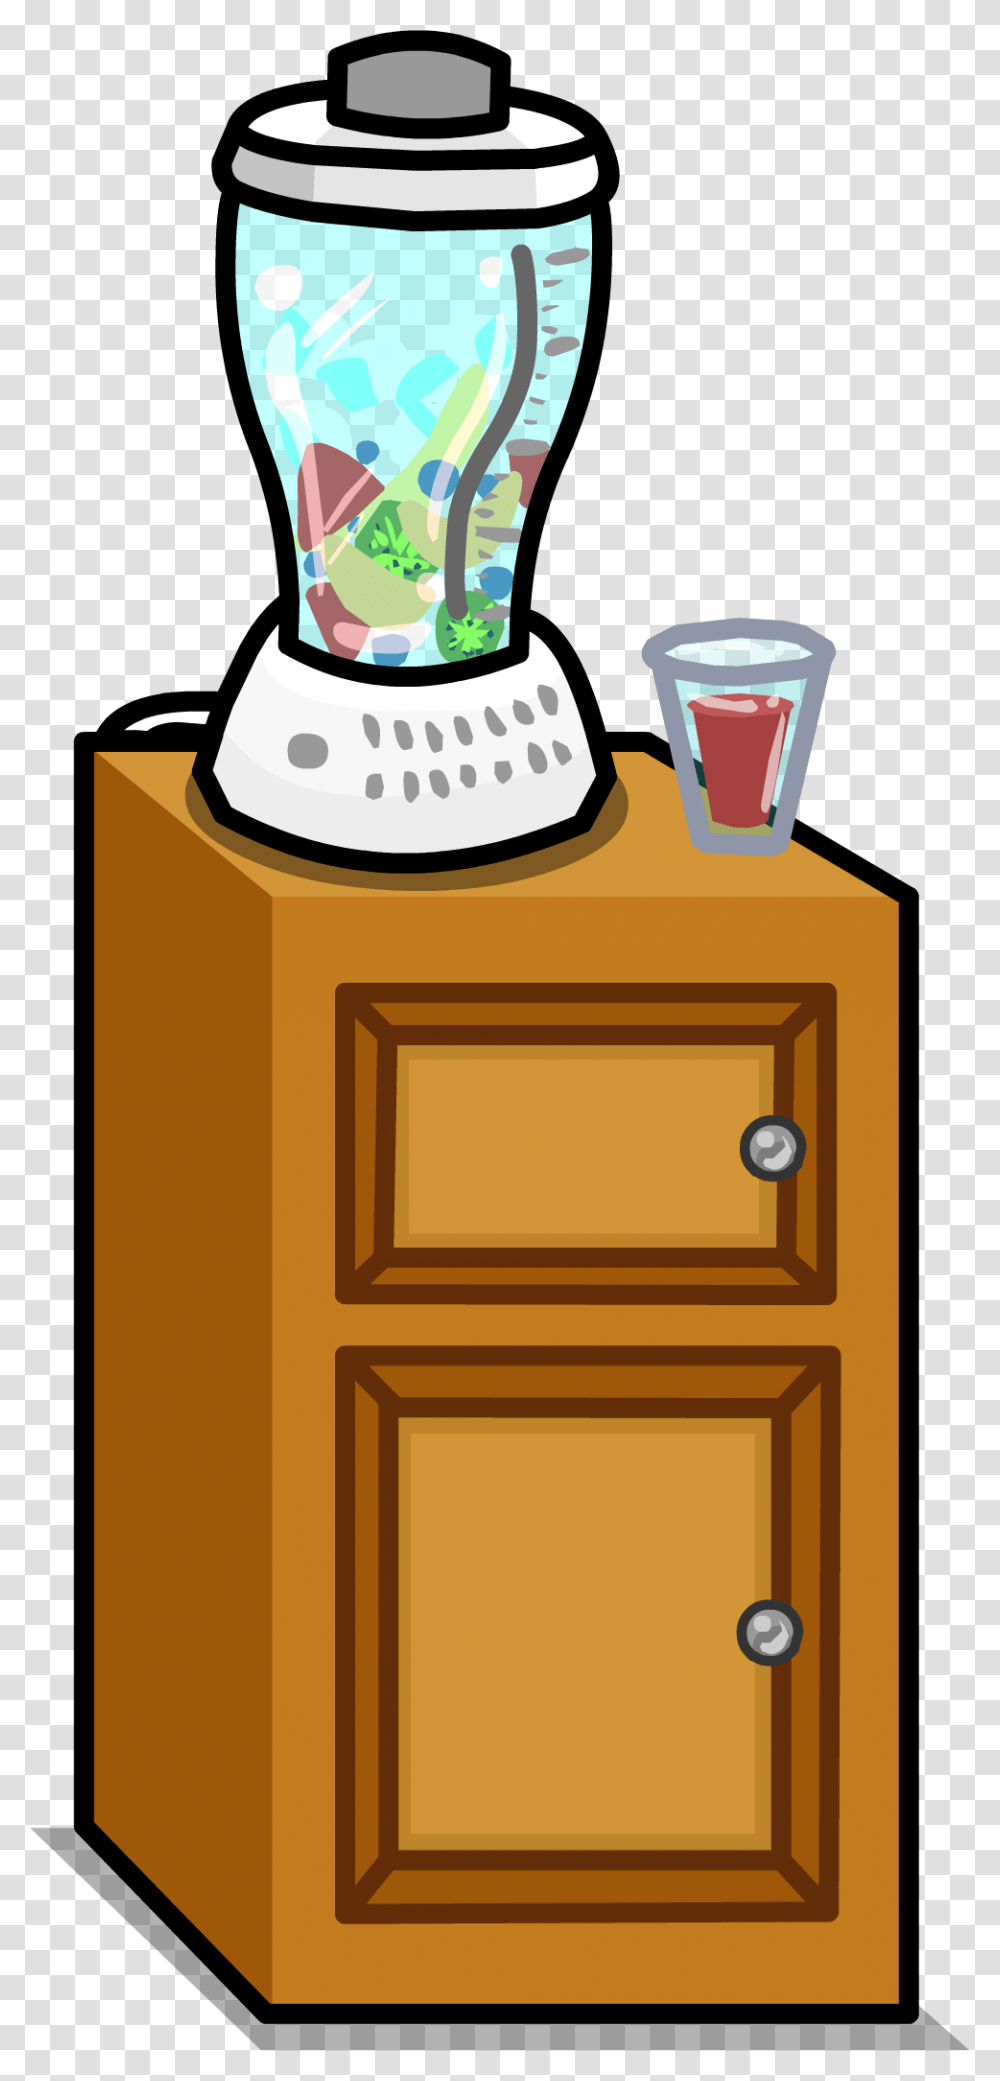 Furniture Icon Club Penguin Furniture Igloo Id Vitamin, Tabletop, Mailbox, Letterbox, Appliance Transparent Png